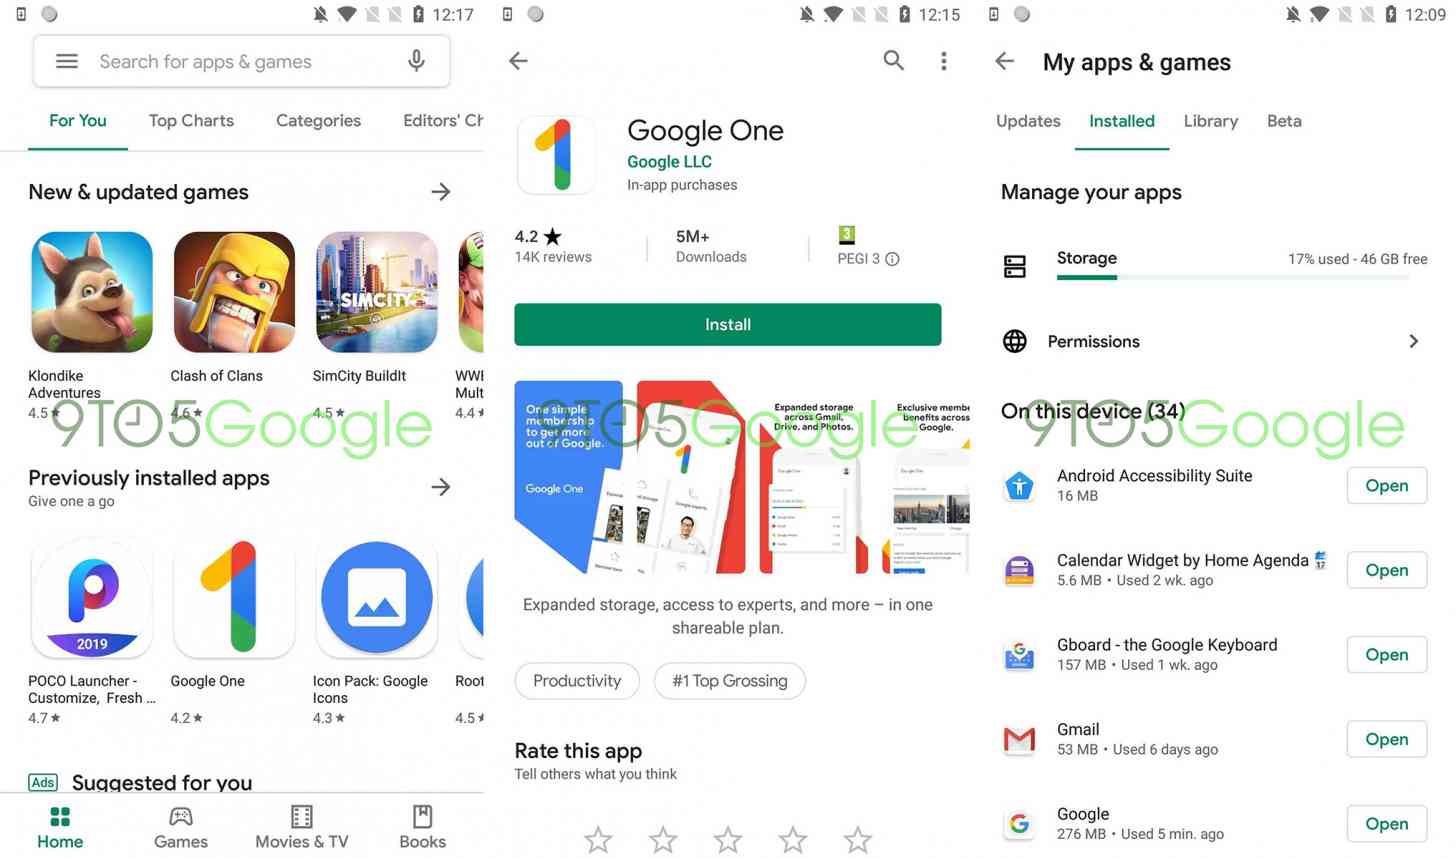 Play Store Material Design refresh